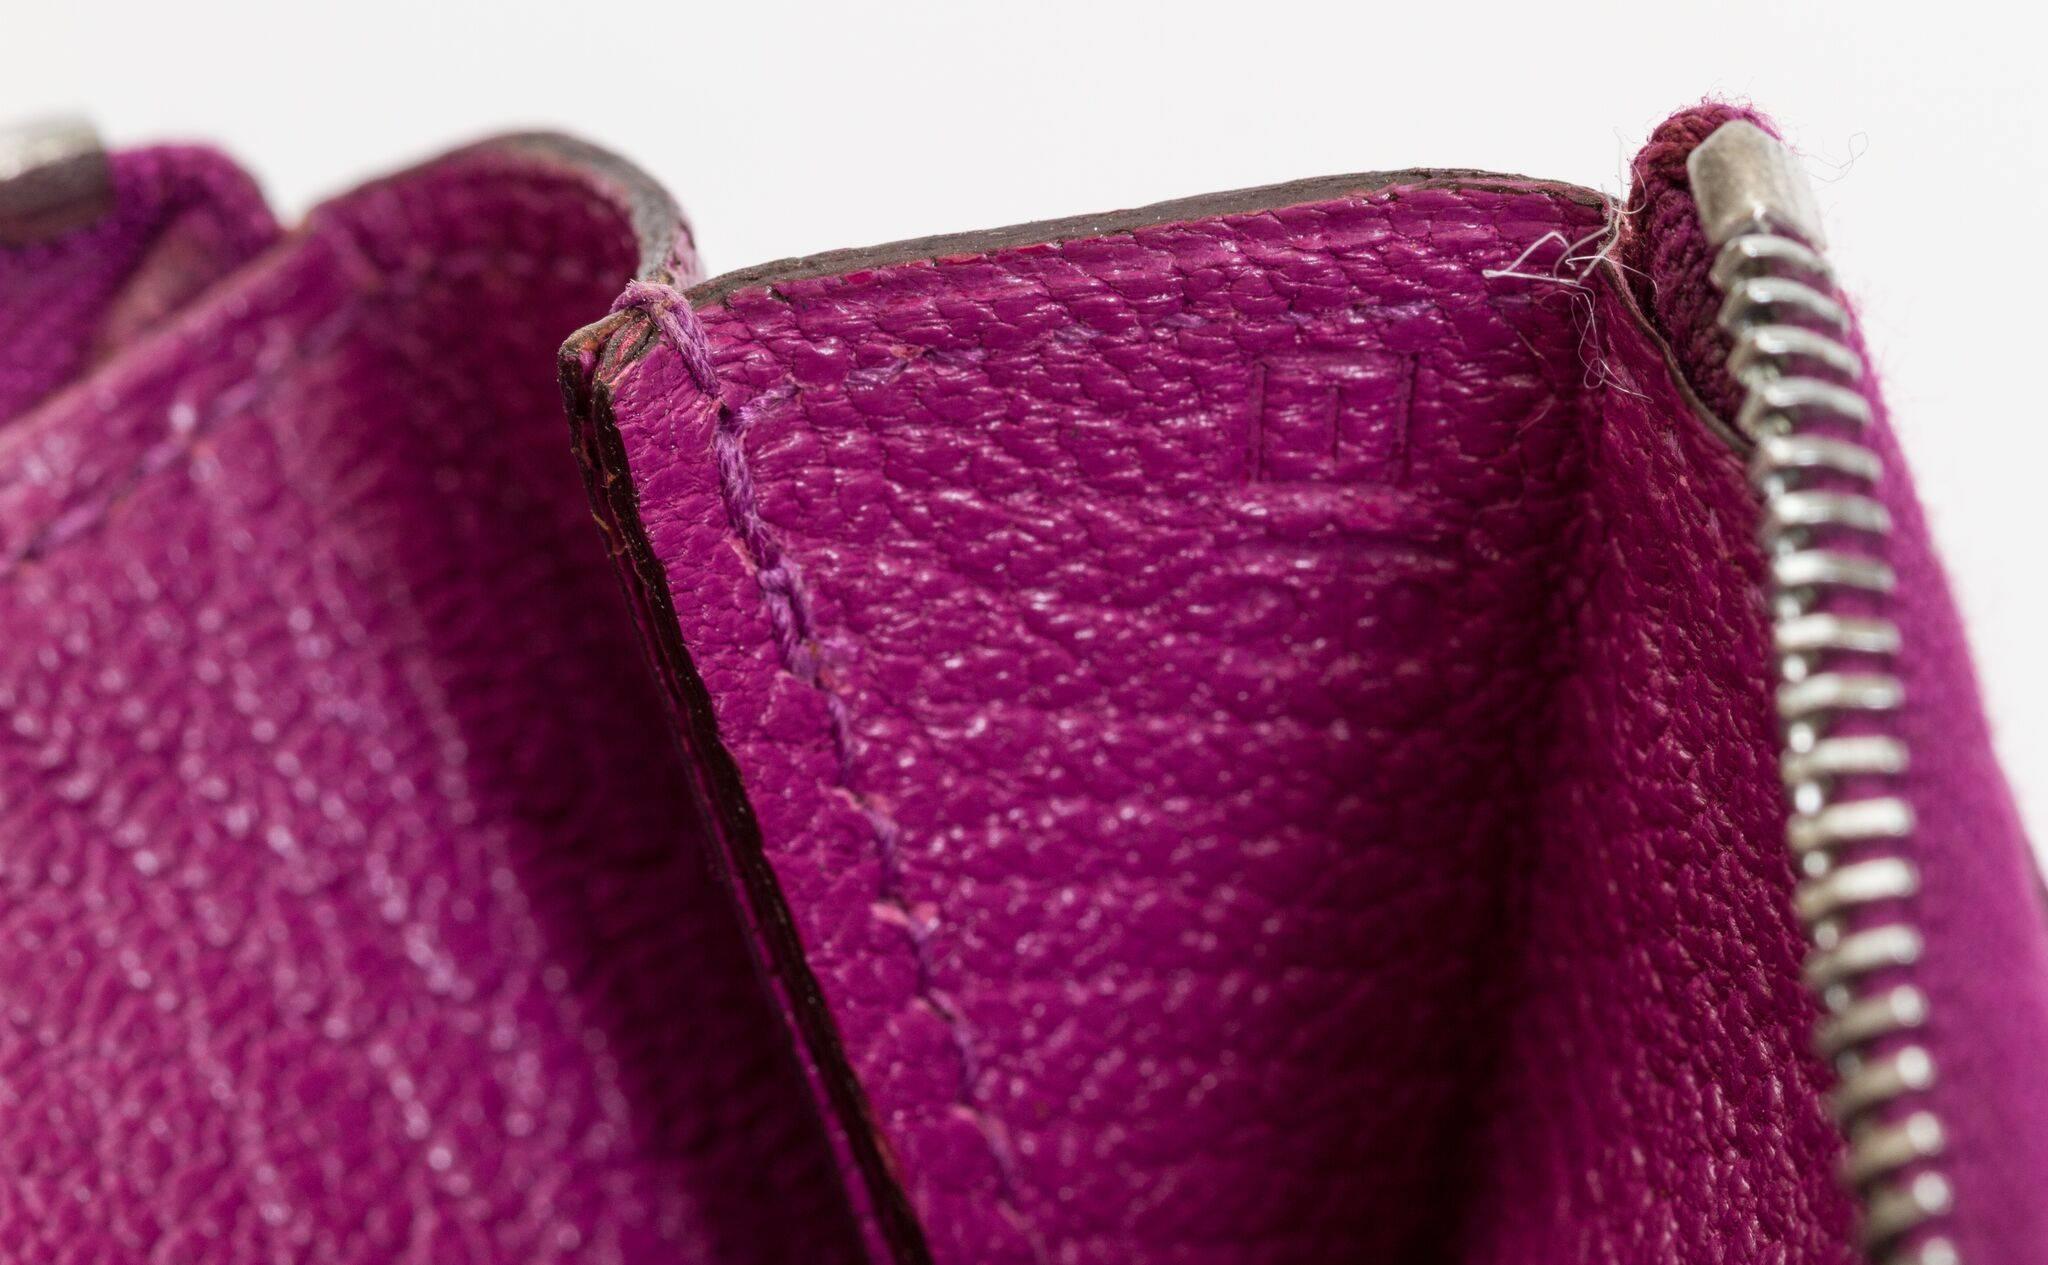 Hermès cattleya purple chevre card wallet (goat skin leather). Date stamp I for 2005.Comes with original box.